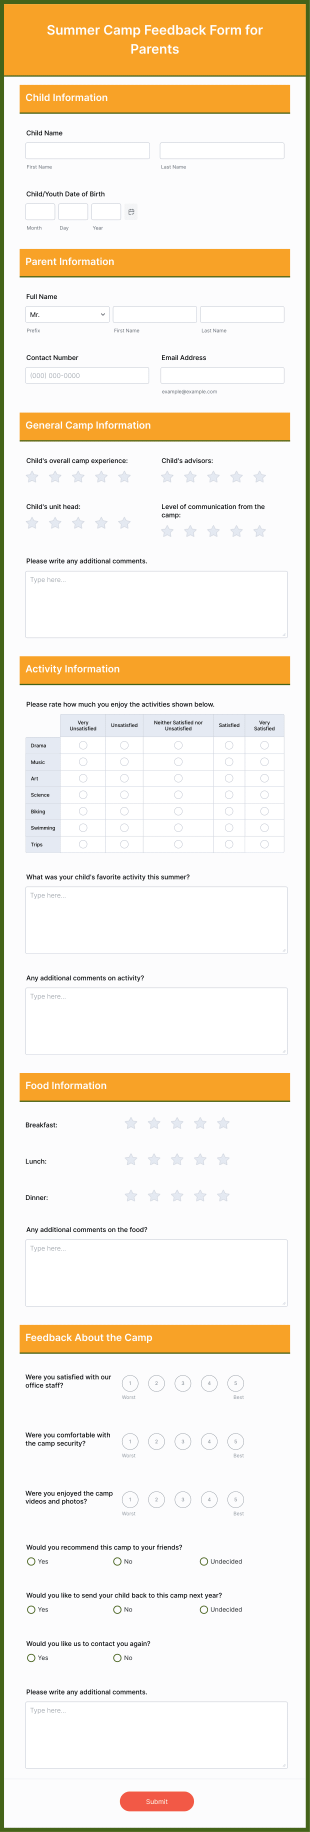 Summer Camp Feedback Form For Parents Form Template